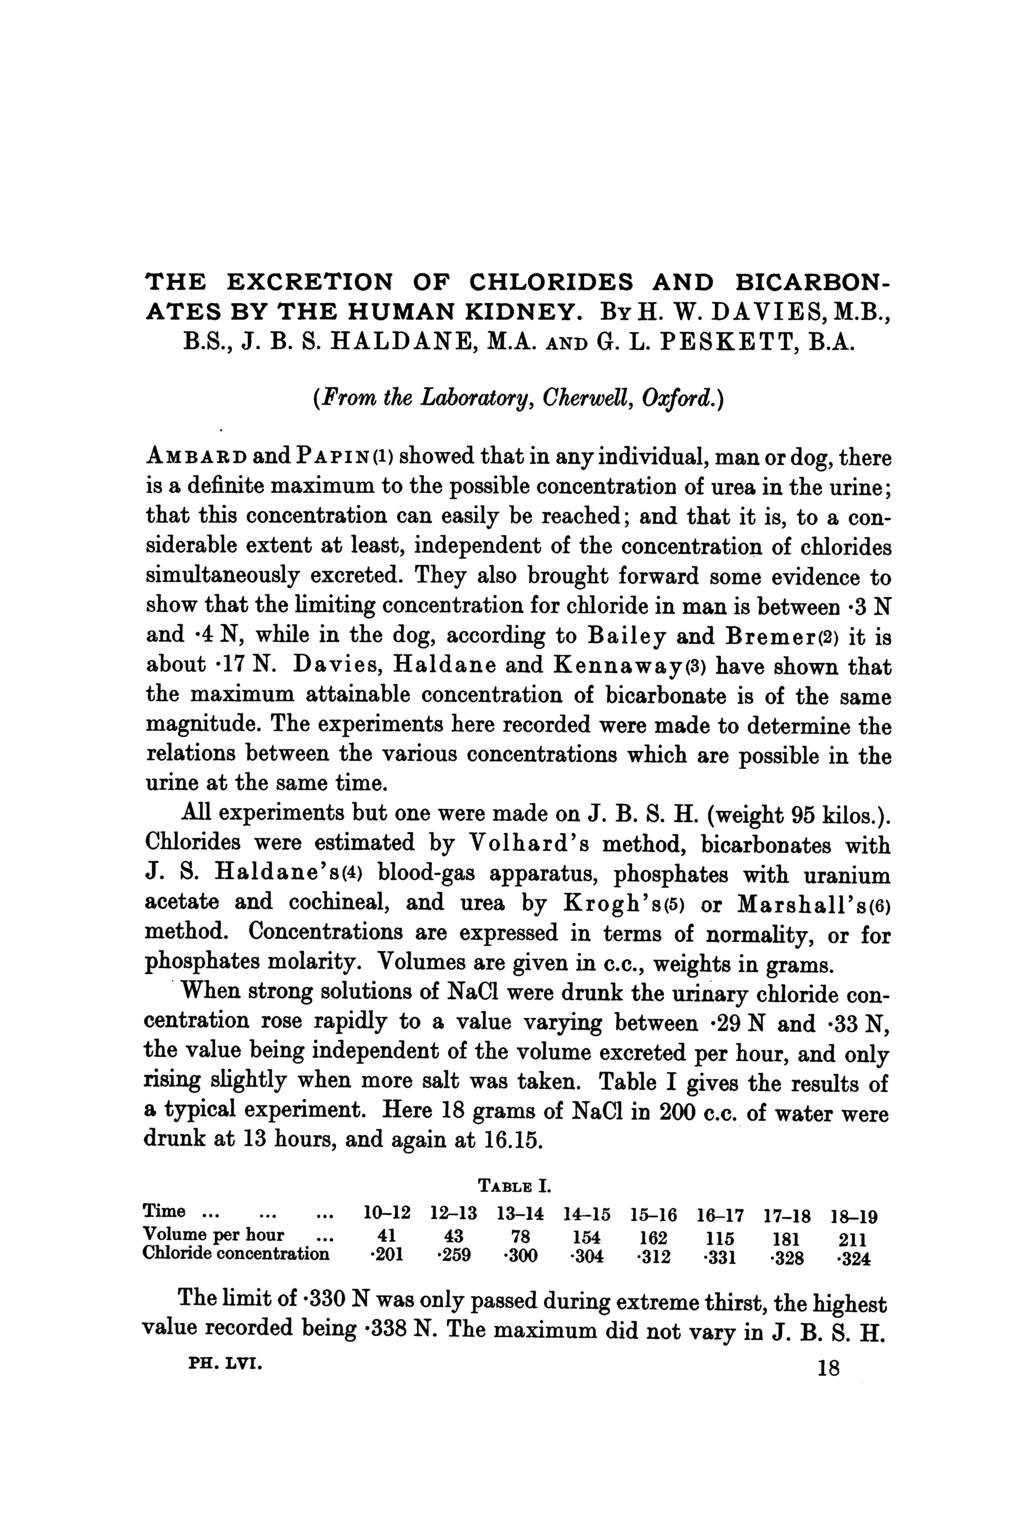 THE EXCRETION OF CHLORIDES AND BICARBON- ATES BY THE HUMAN KIDNEY. BY H. W. DAVIES, M.B., B.S., J. B. S. HALDANE, M.A. AND G. L. PESKETT, B.A. (From the Laboratory, Cherwell, Oxford.